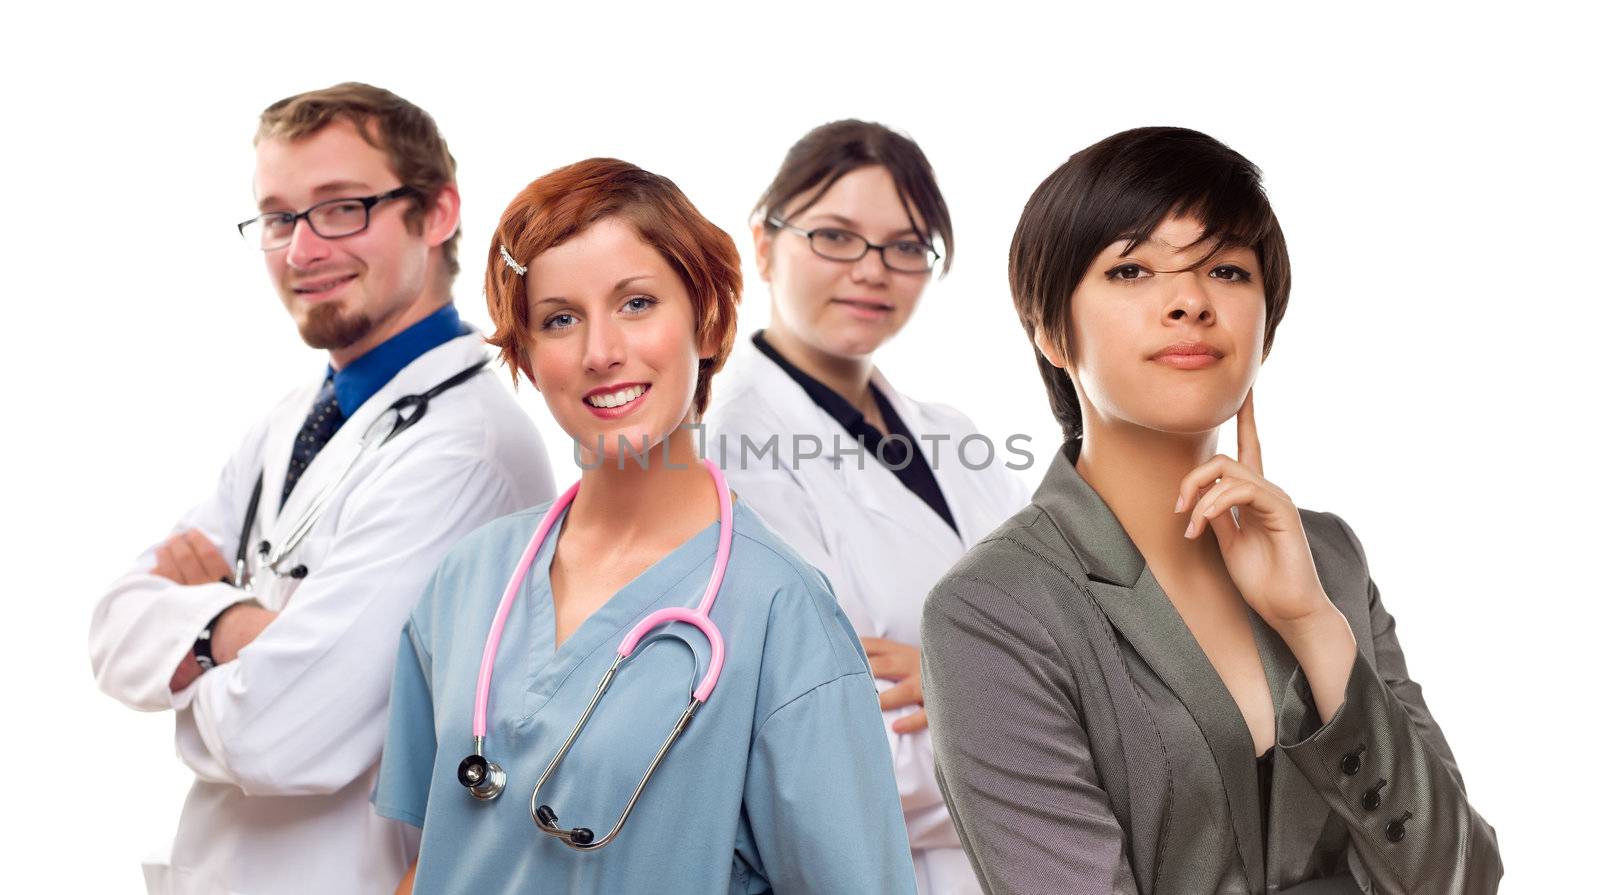 Young Mixed Race Woman with Doctors and Nurses Behind by Feverpitched